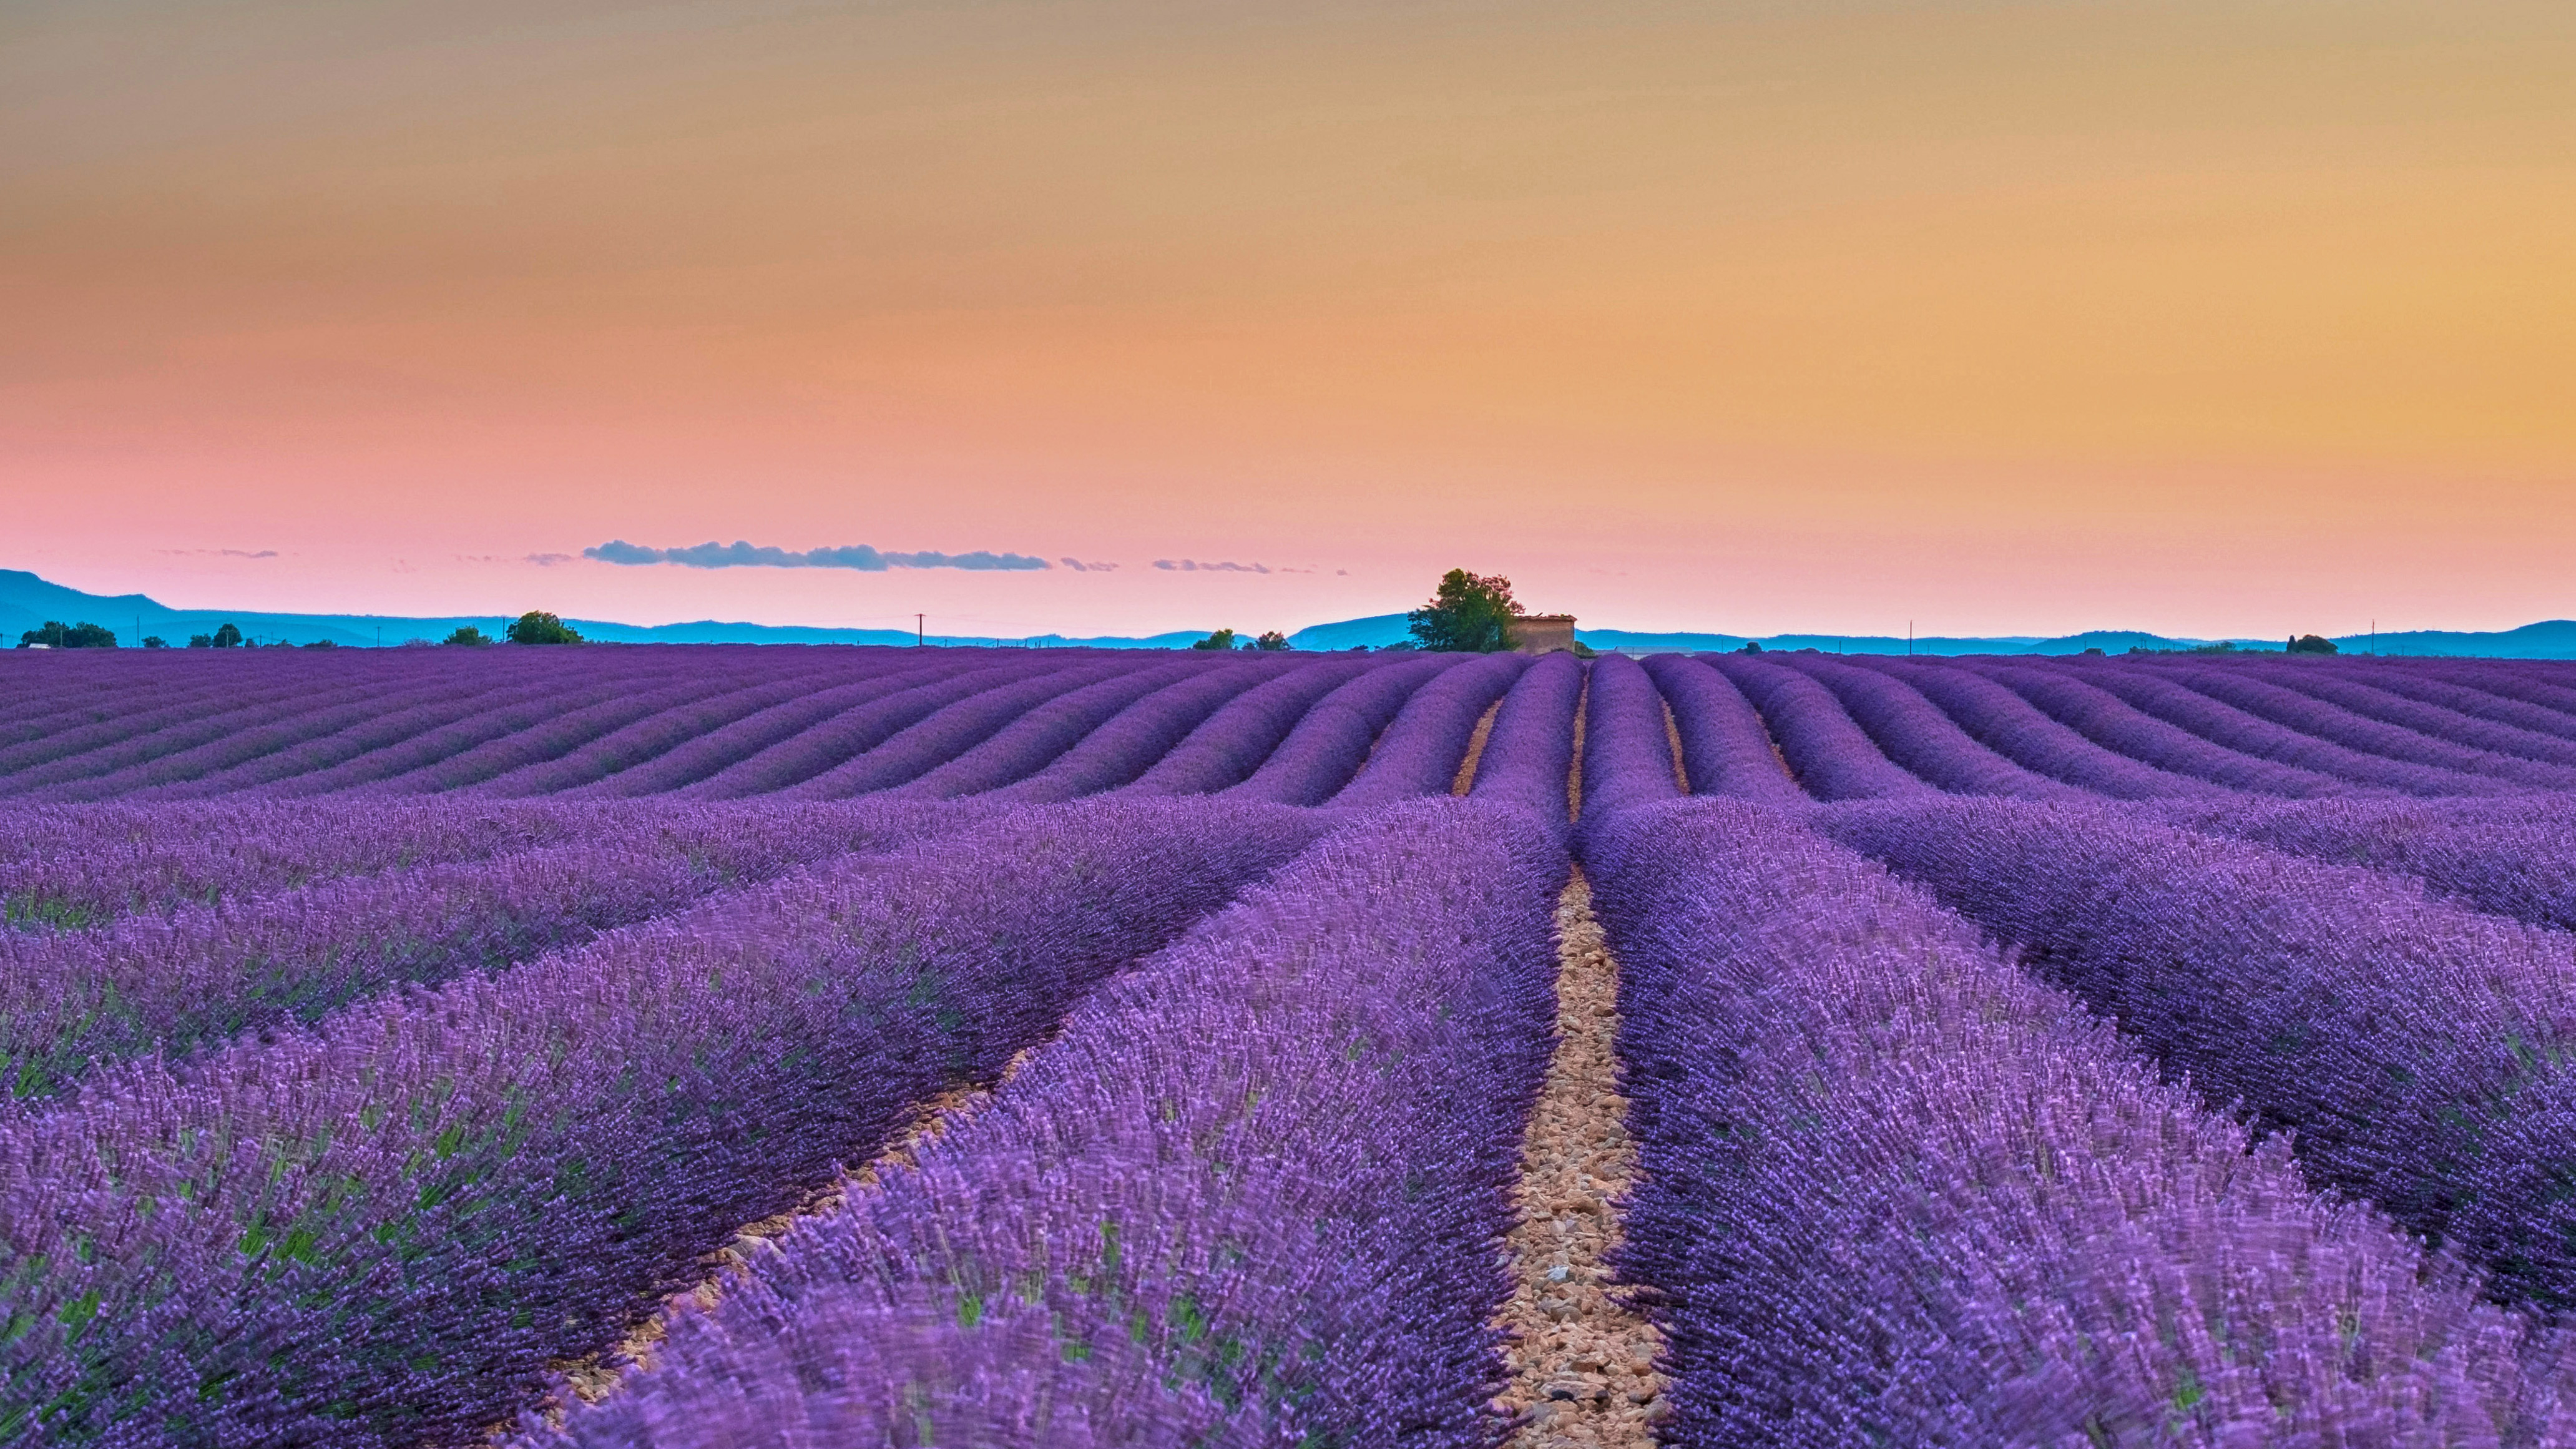 Wallpaper Summer lavender fields trees sunset 1920x1440 HD Picture Image